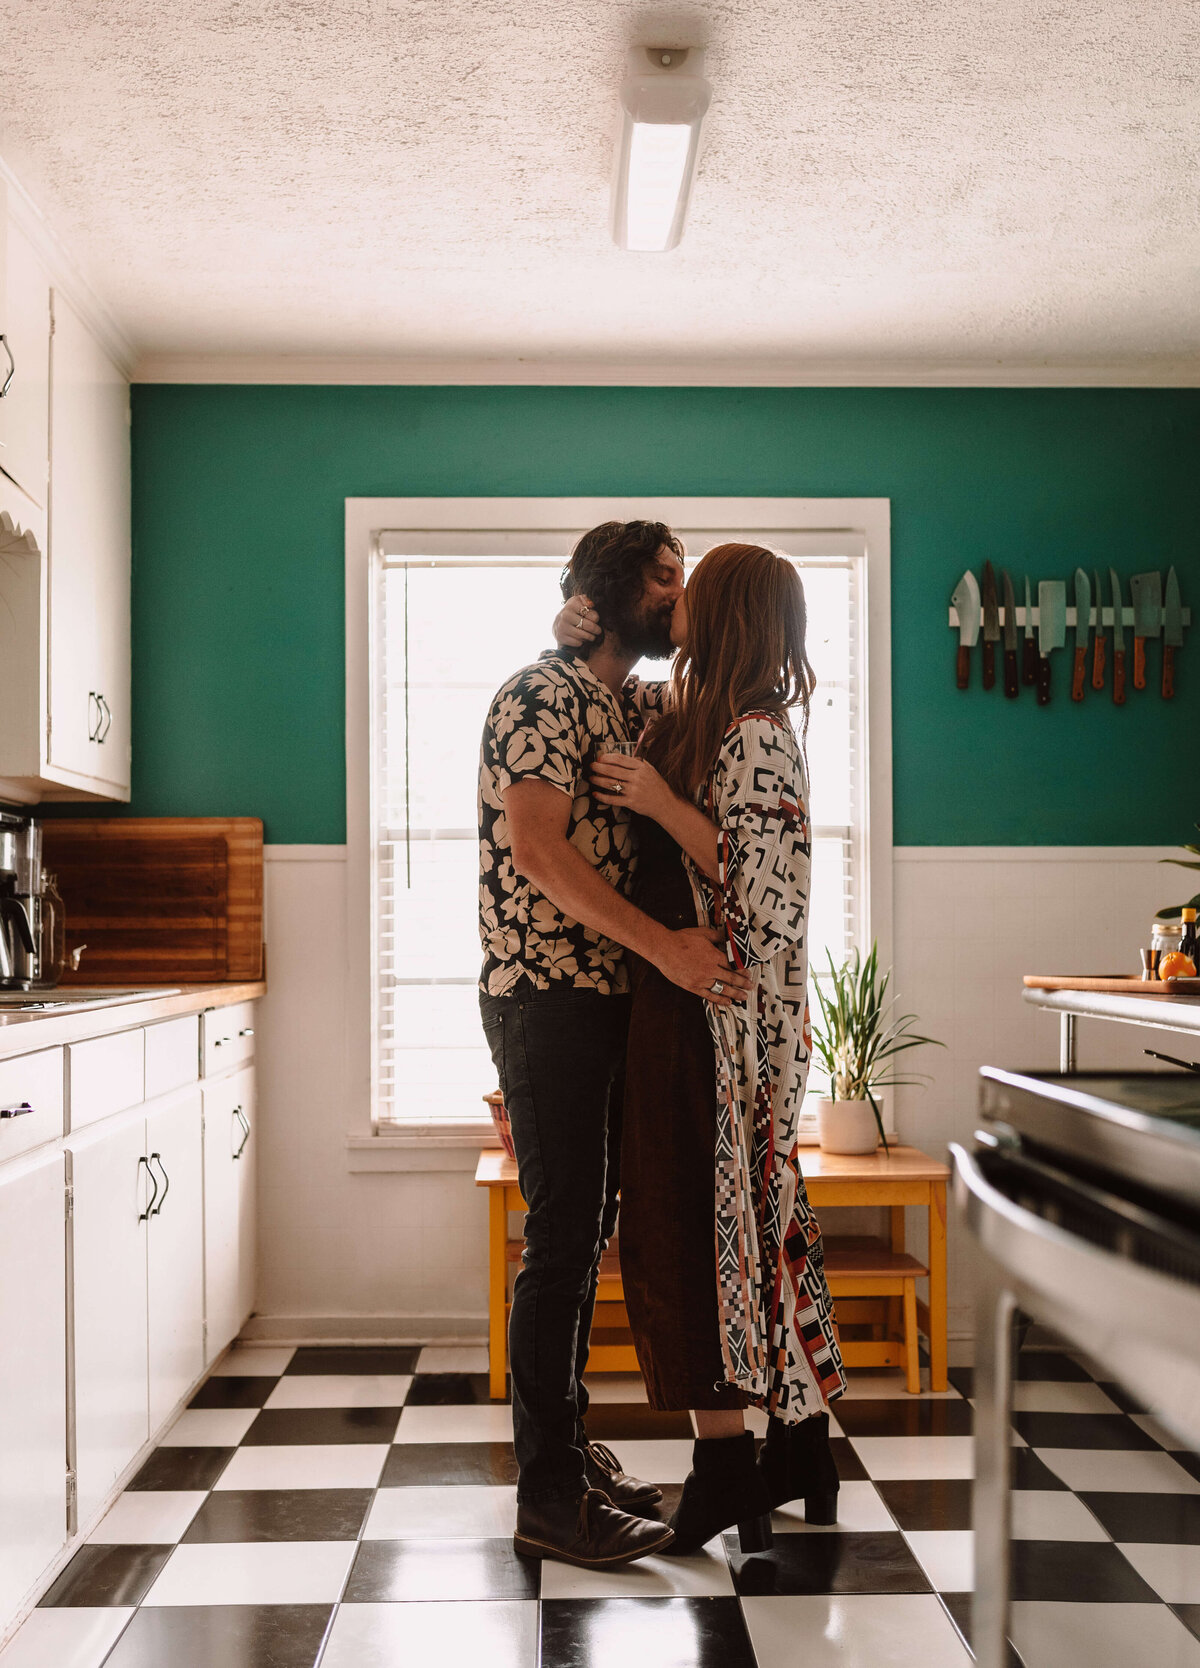 engaged couple dance & kiss in vintage kitchen in cove home